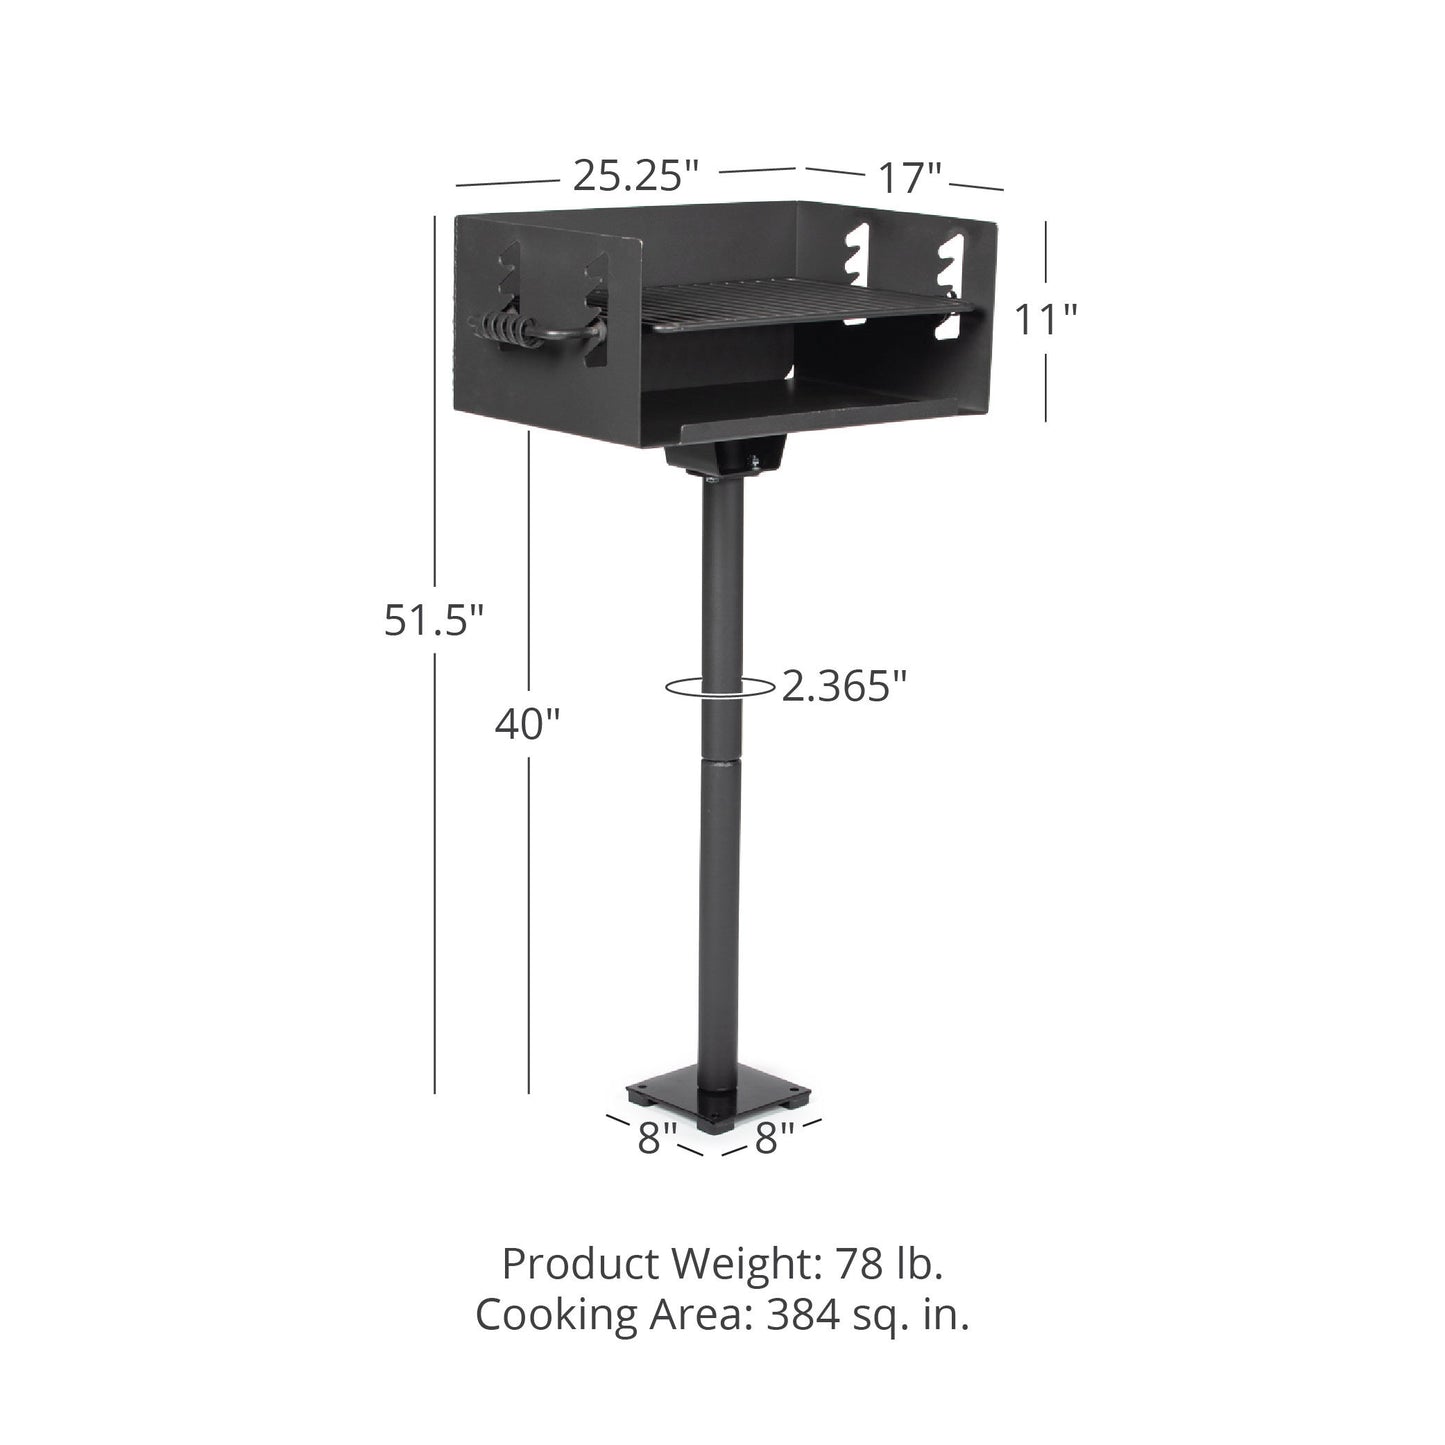 384 Sq. In. Jumbo Park-Style Grill - Optional Mounting Base: Grill + Base Anchor | Grill + Base Anchor - view 20